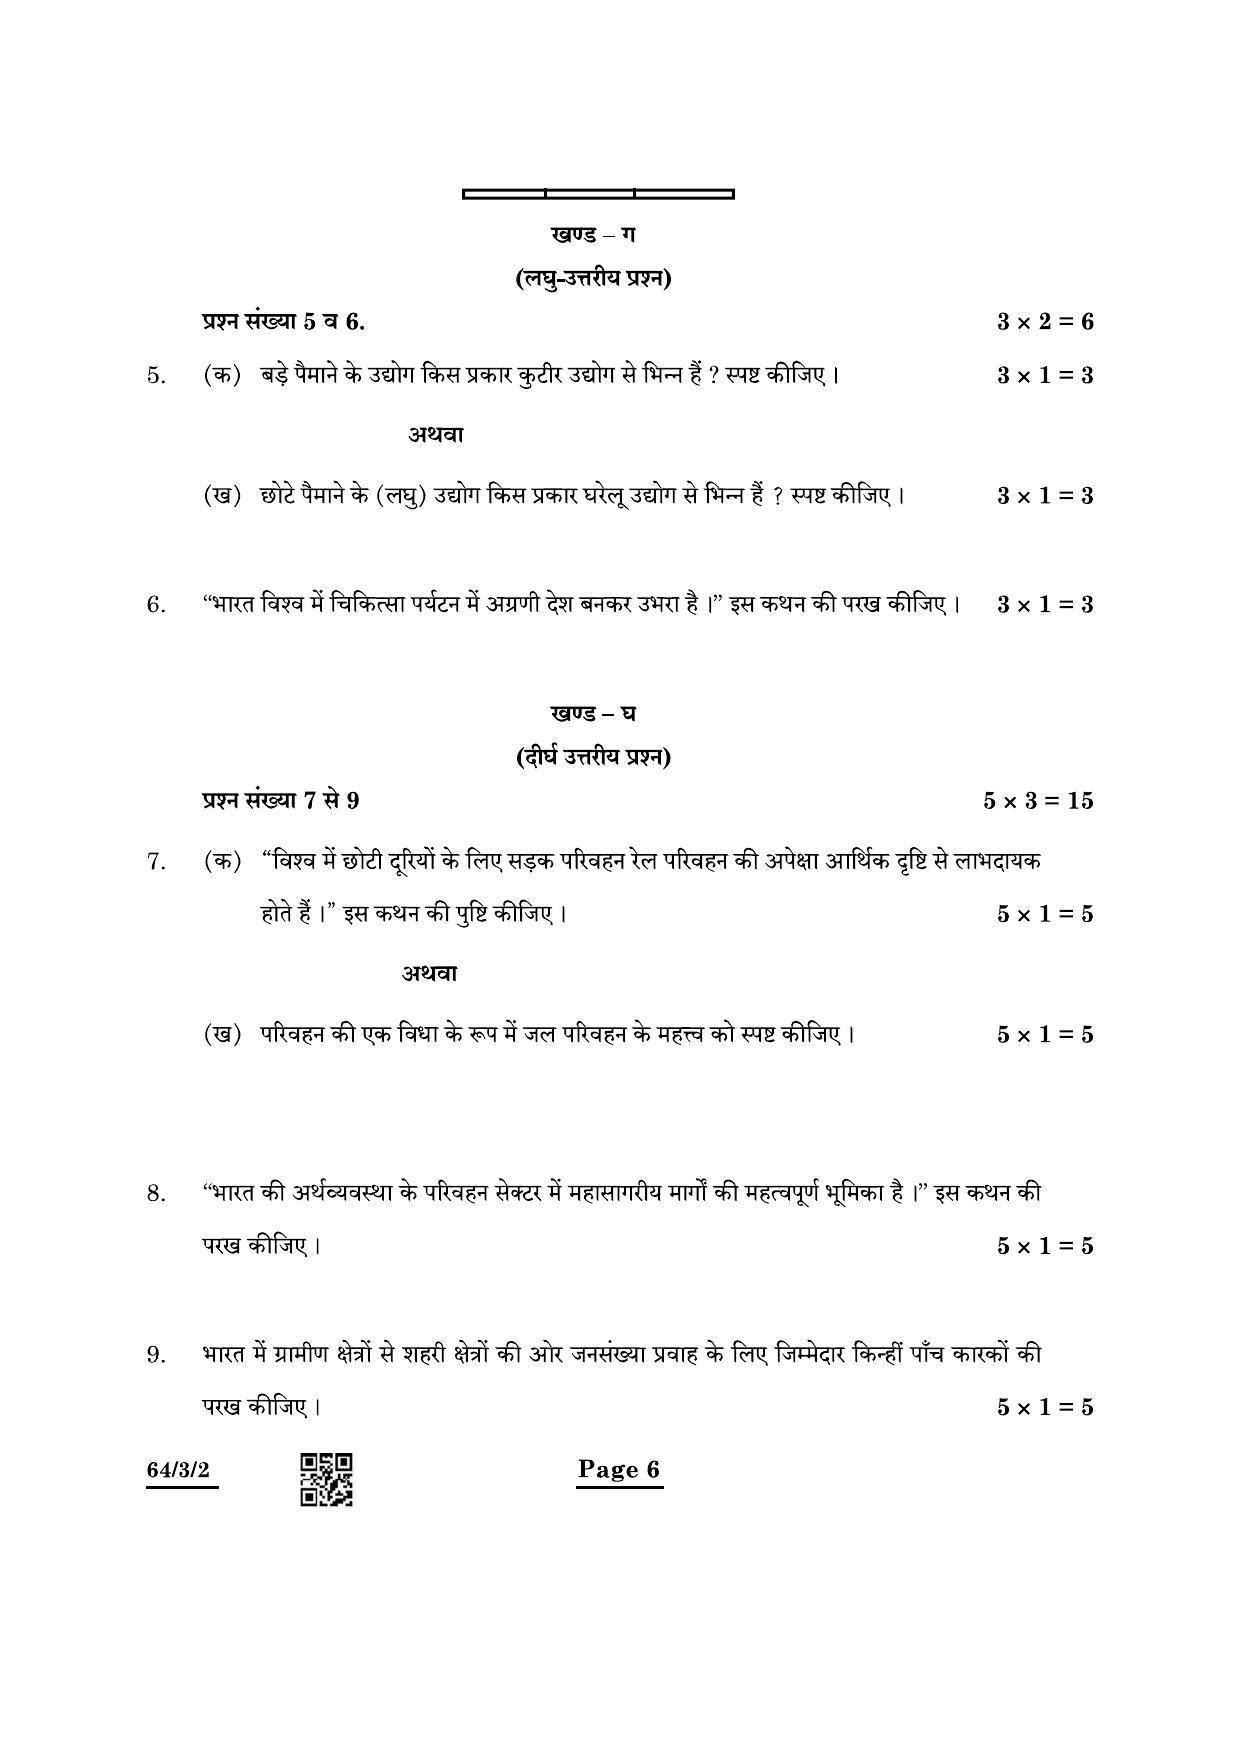 CBSE Class 12 64-3-2 Geography 2022 Question Paper - Page 6